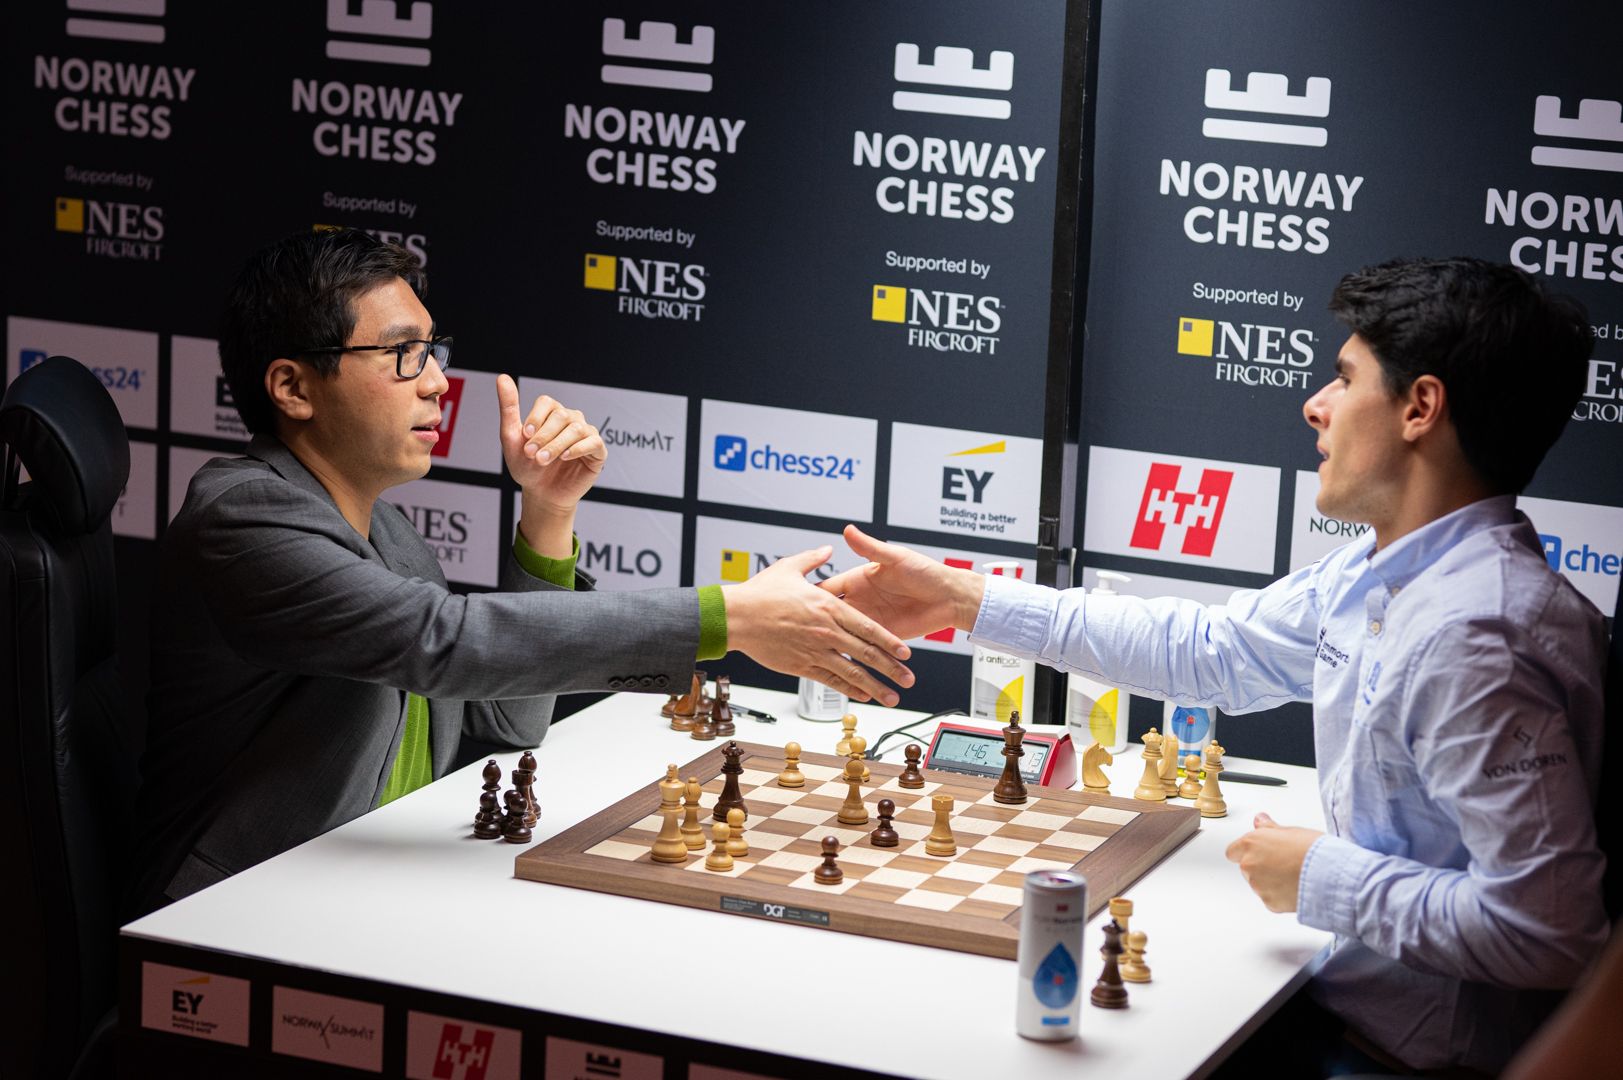 Norway Chess: Viswanathan Anand defeats Magnus Carlsen, leads standings